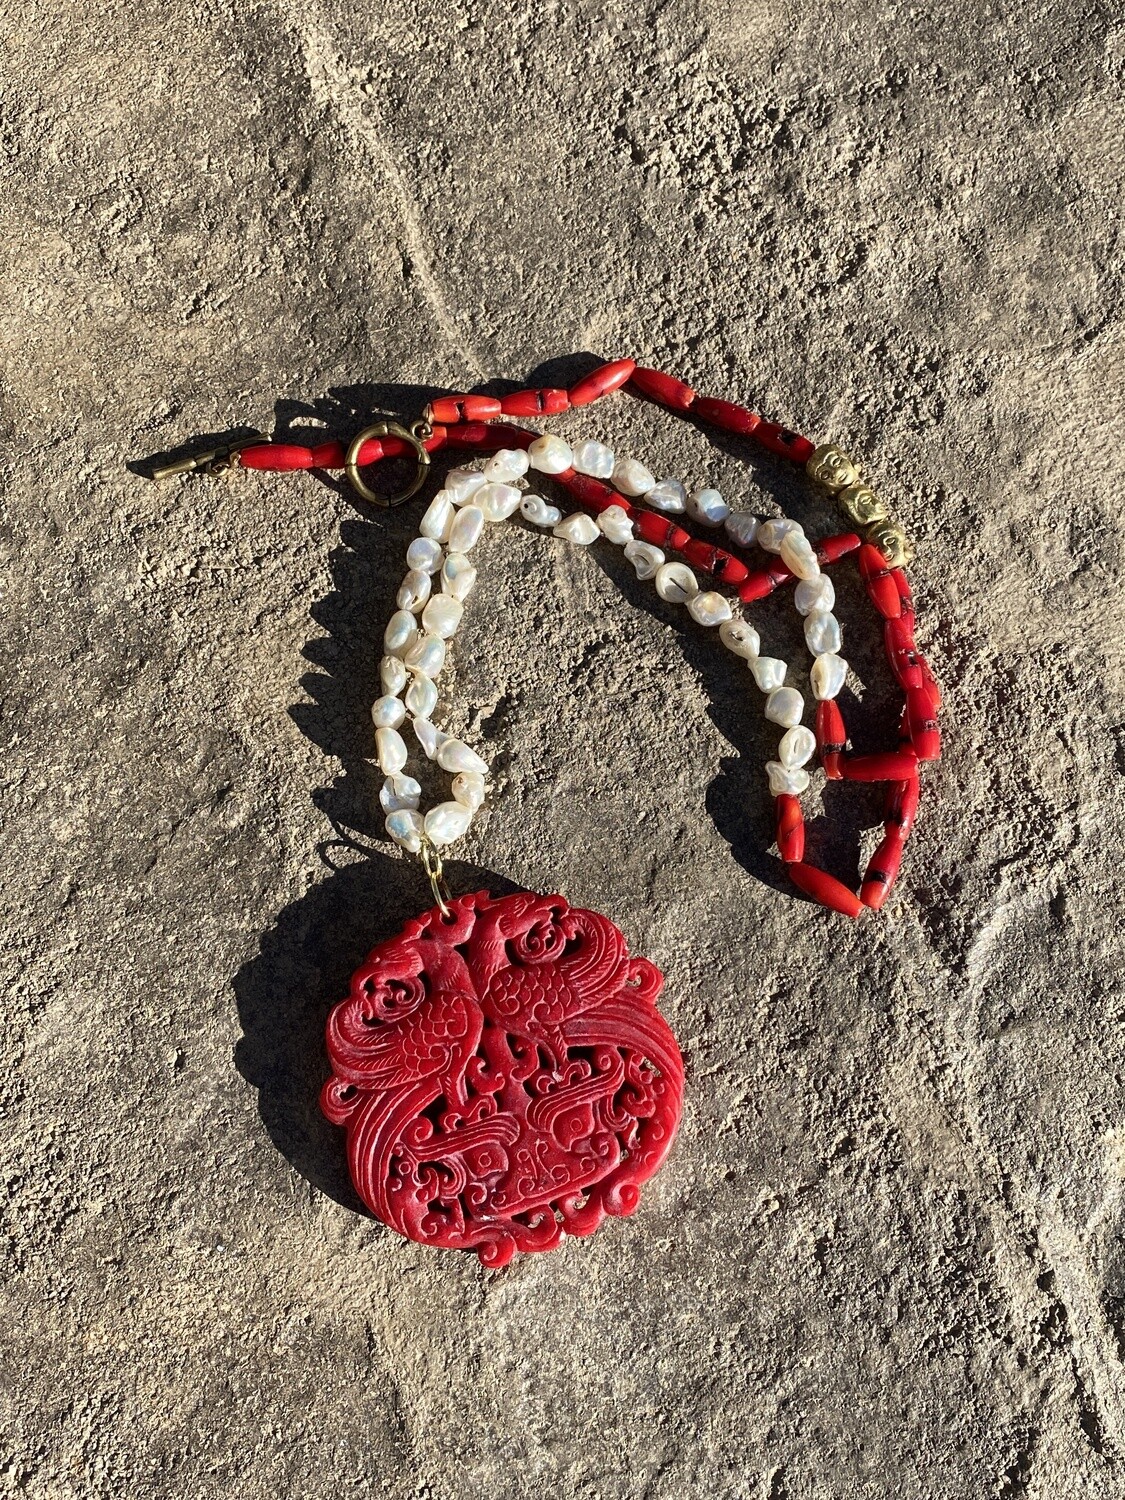 Spectacular Carved Asian Pendant Pearl Red Coral Necklace